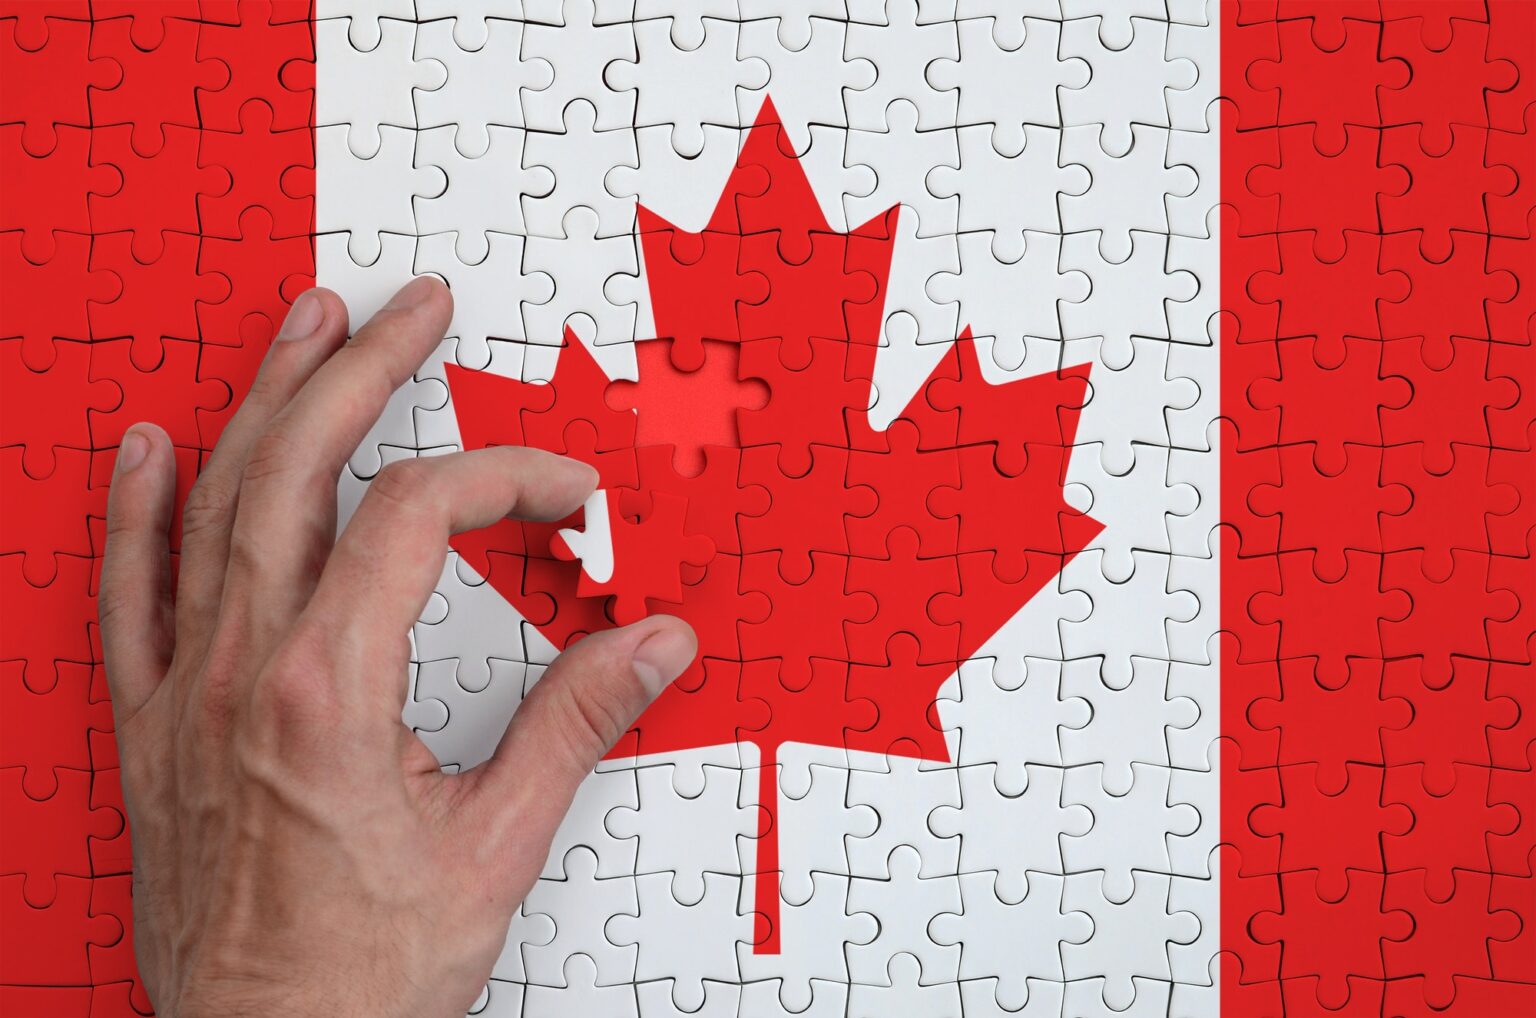 Canada flag is depicted on a puzzle, which the man's hand completes to fold.